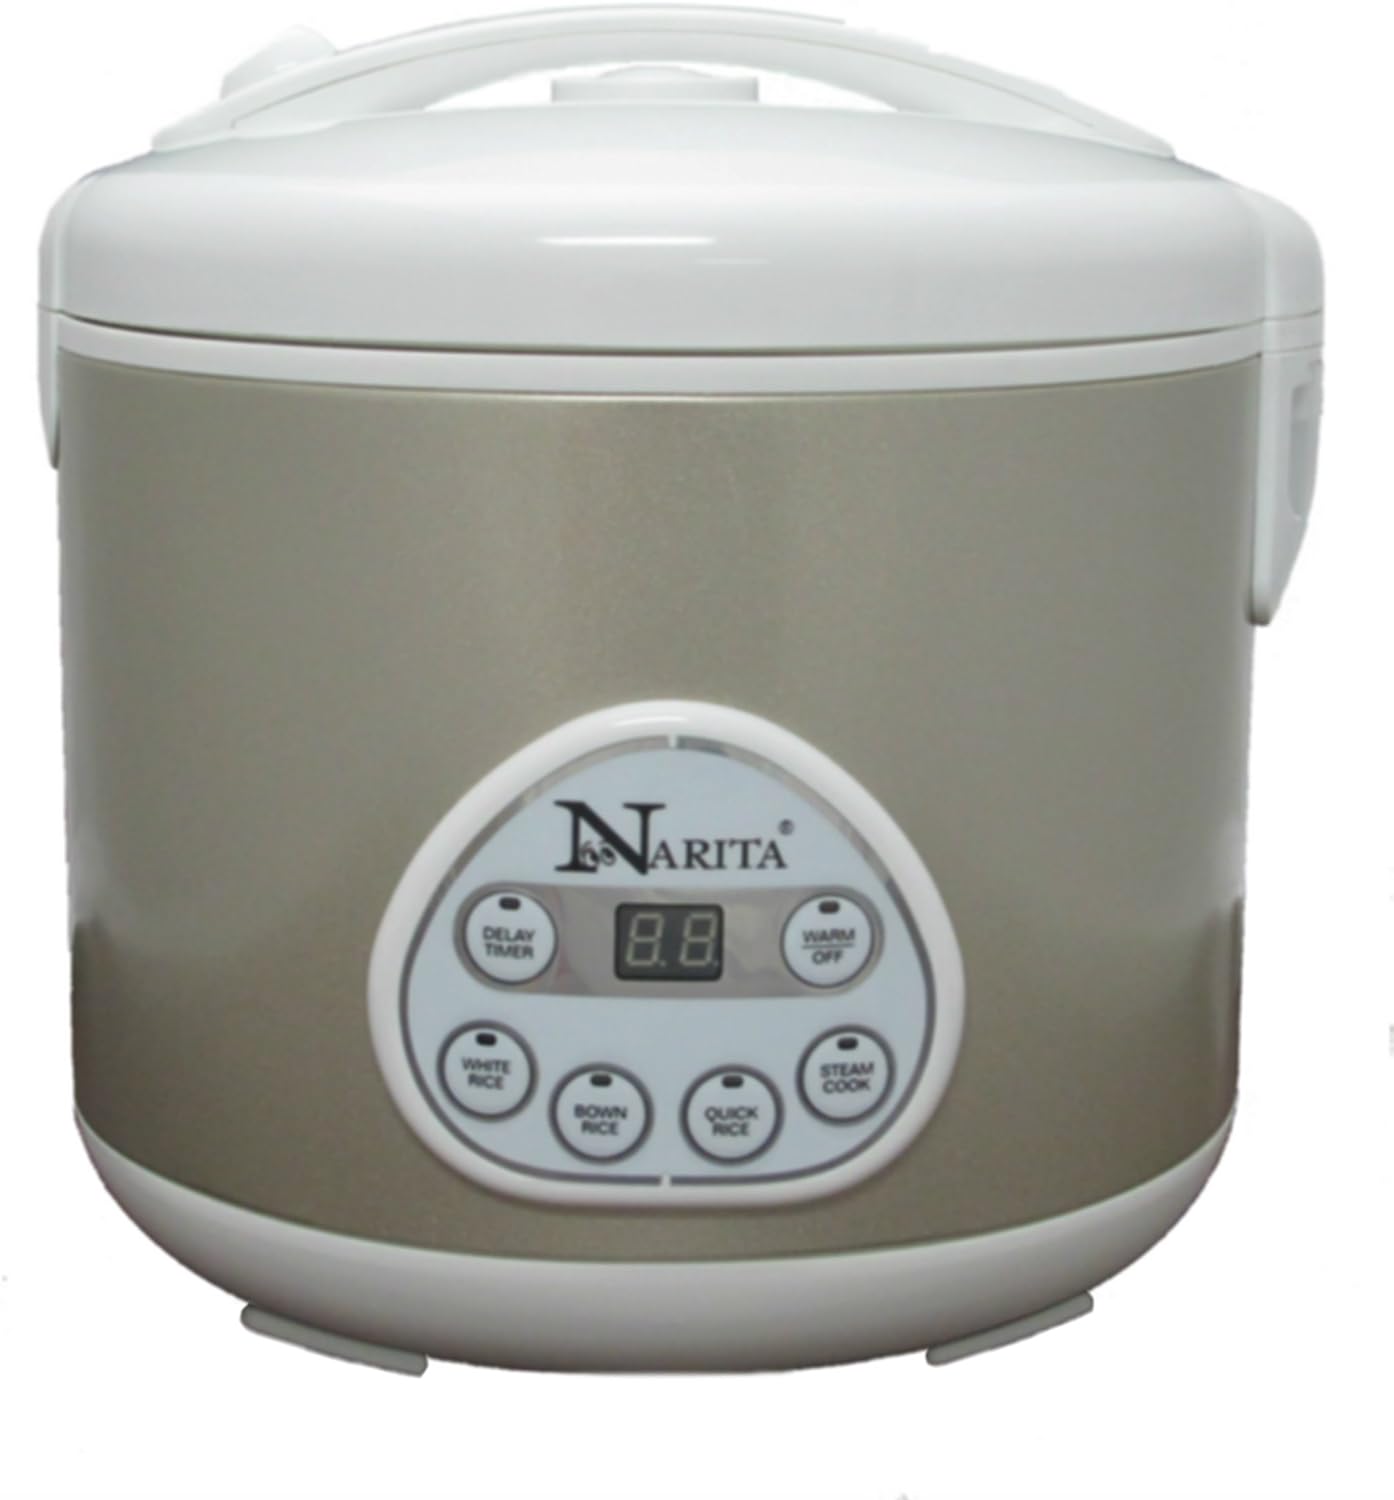 Narita 6-cup Digital Rice Cooker with Steamer